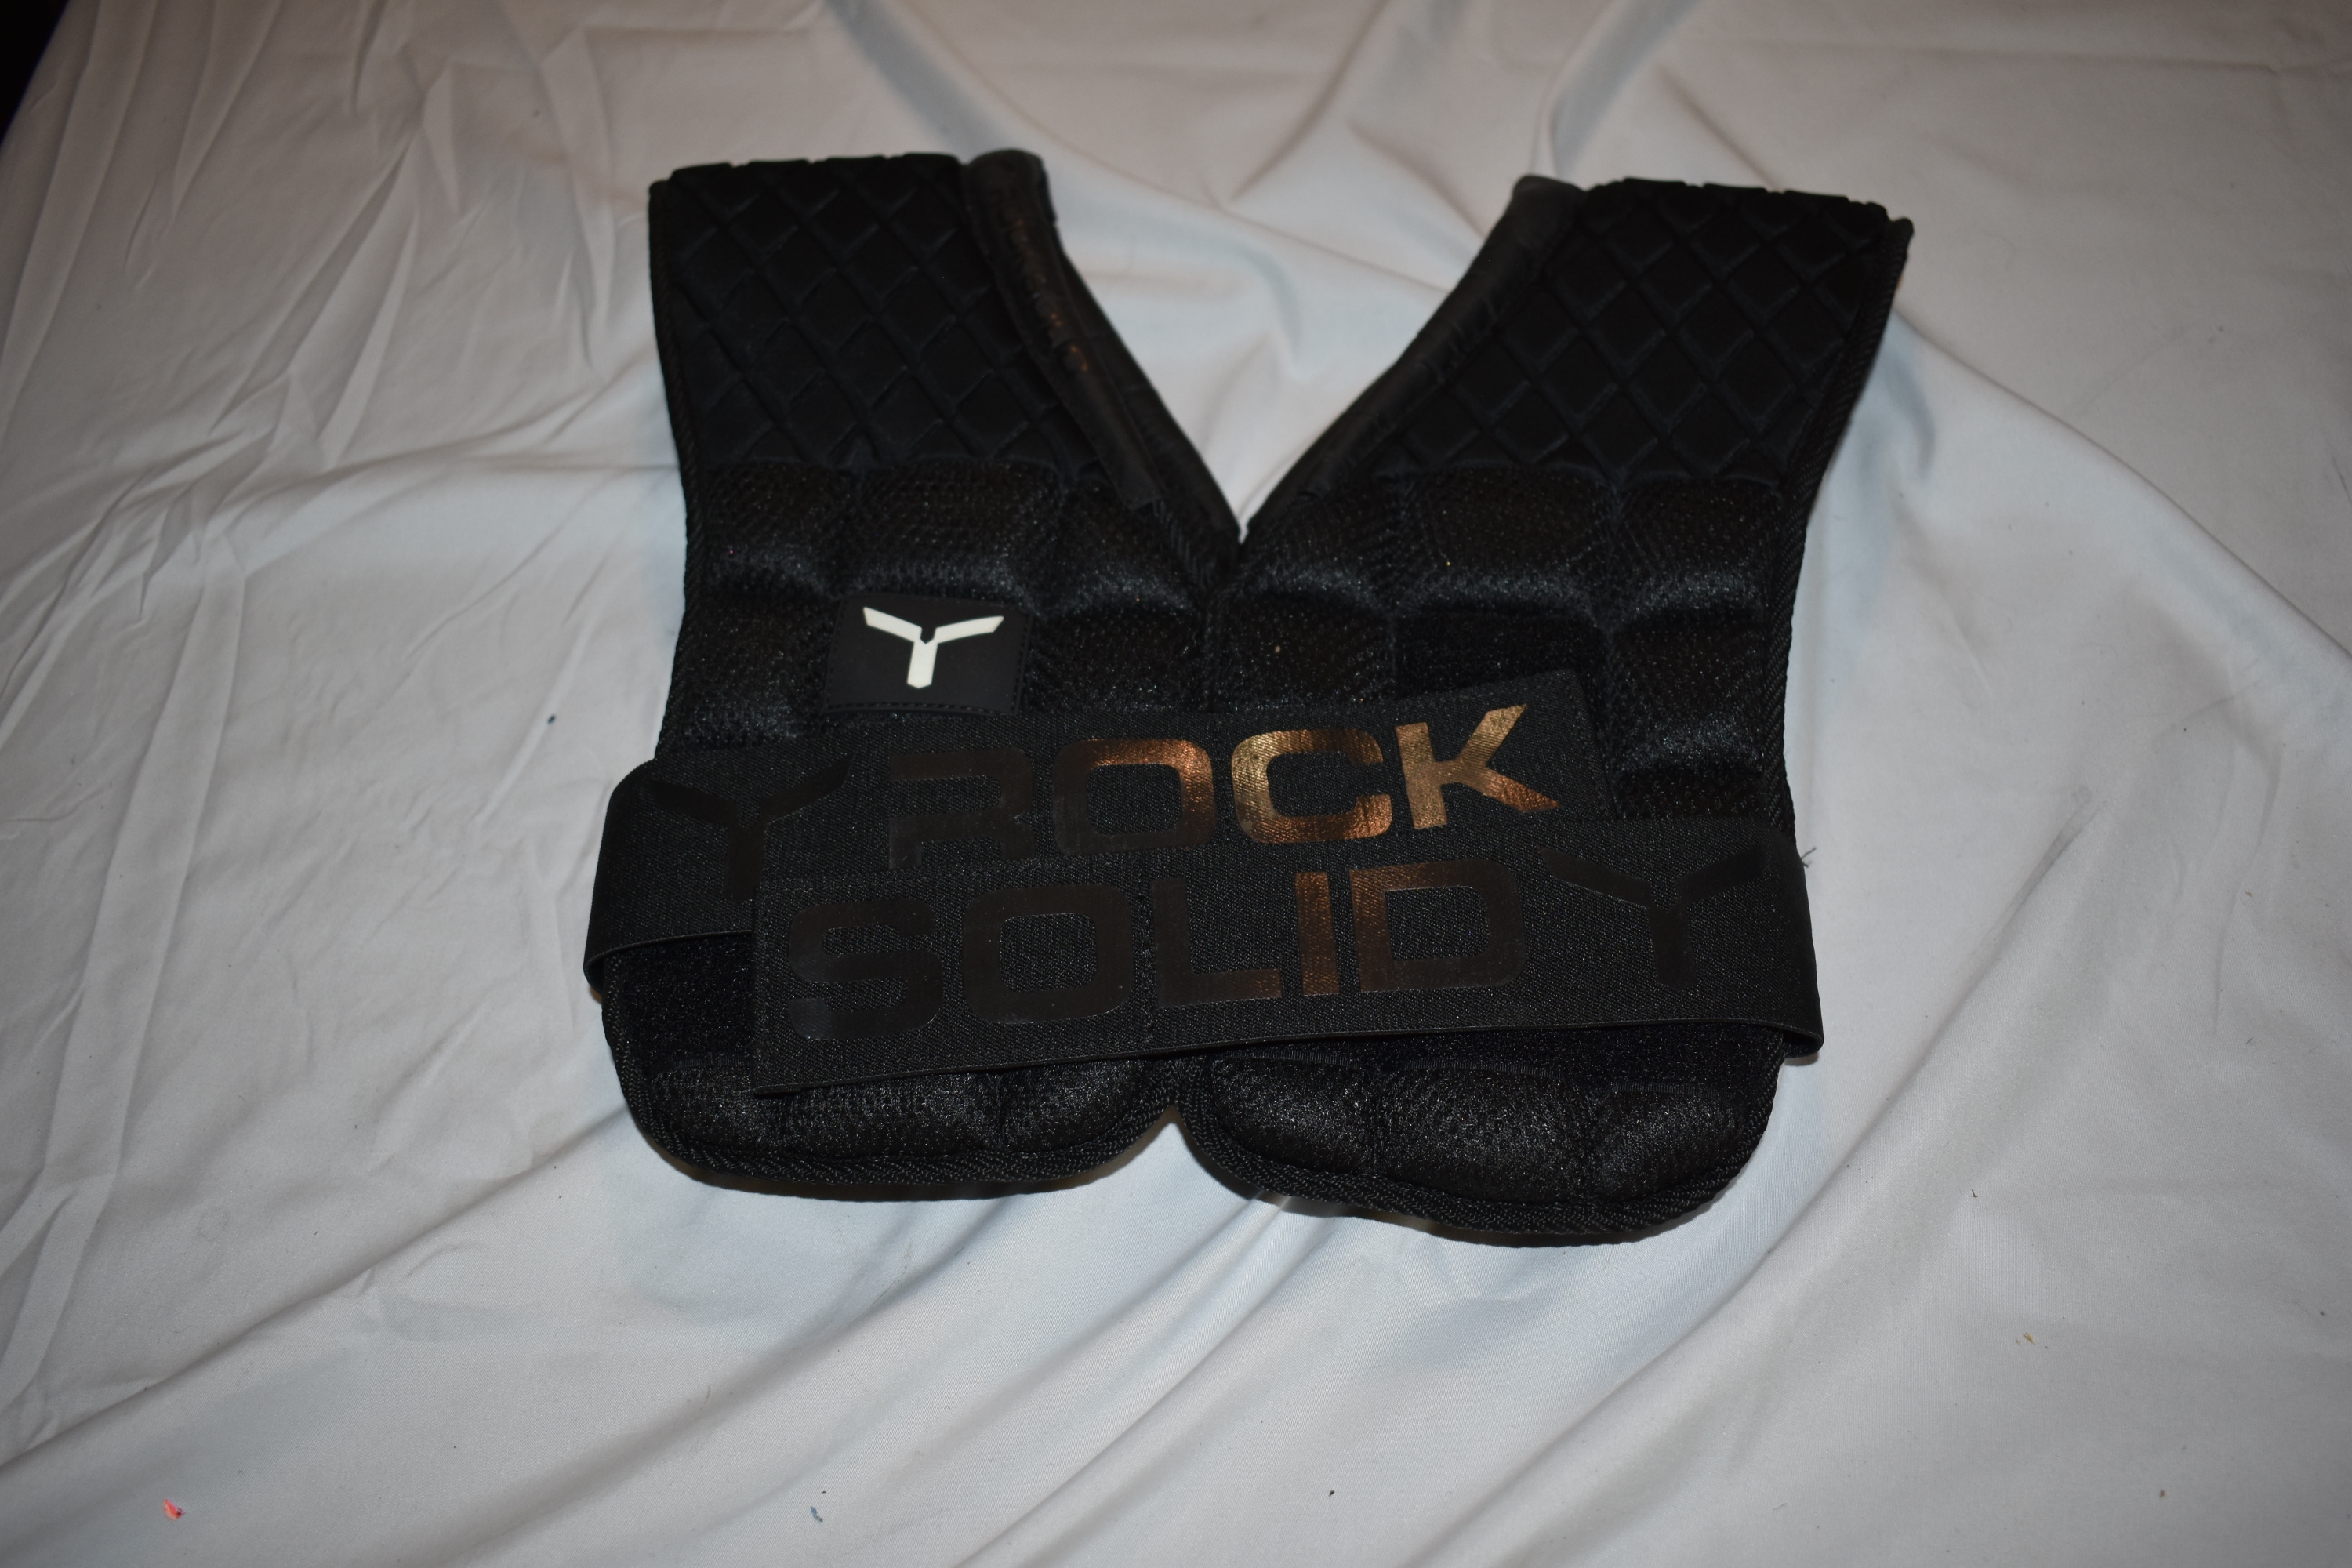 Rock Solid Flex Football Pads, Black, Small - New Condition!